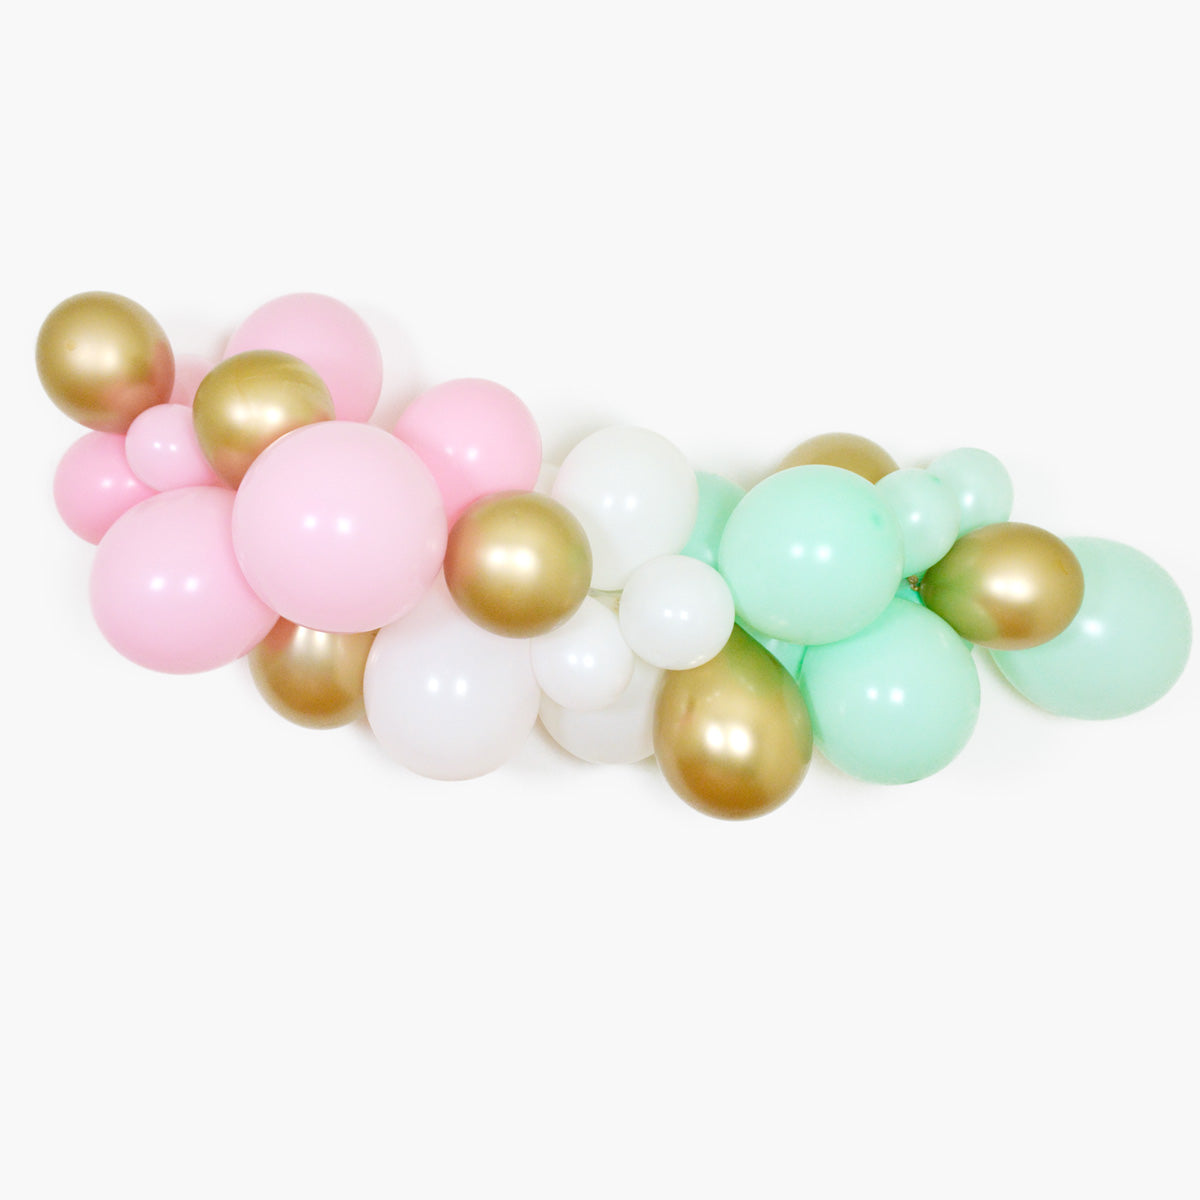 Pink Mint Holiday Balloon Garland Kit, Christmas Party Decoration, Pastel Holiday Balloon Garland, Girl Birthday Party, Girl Baby Shower